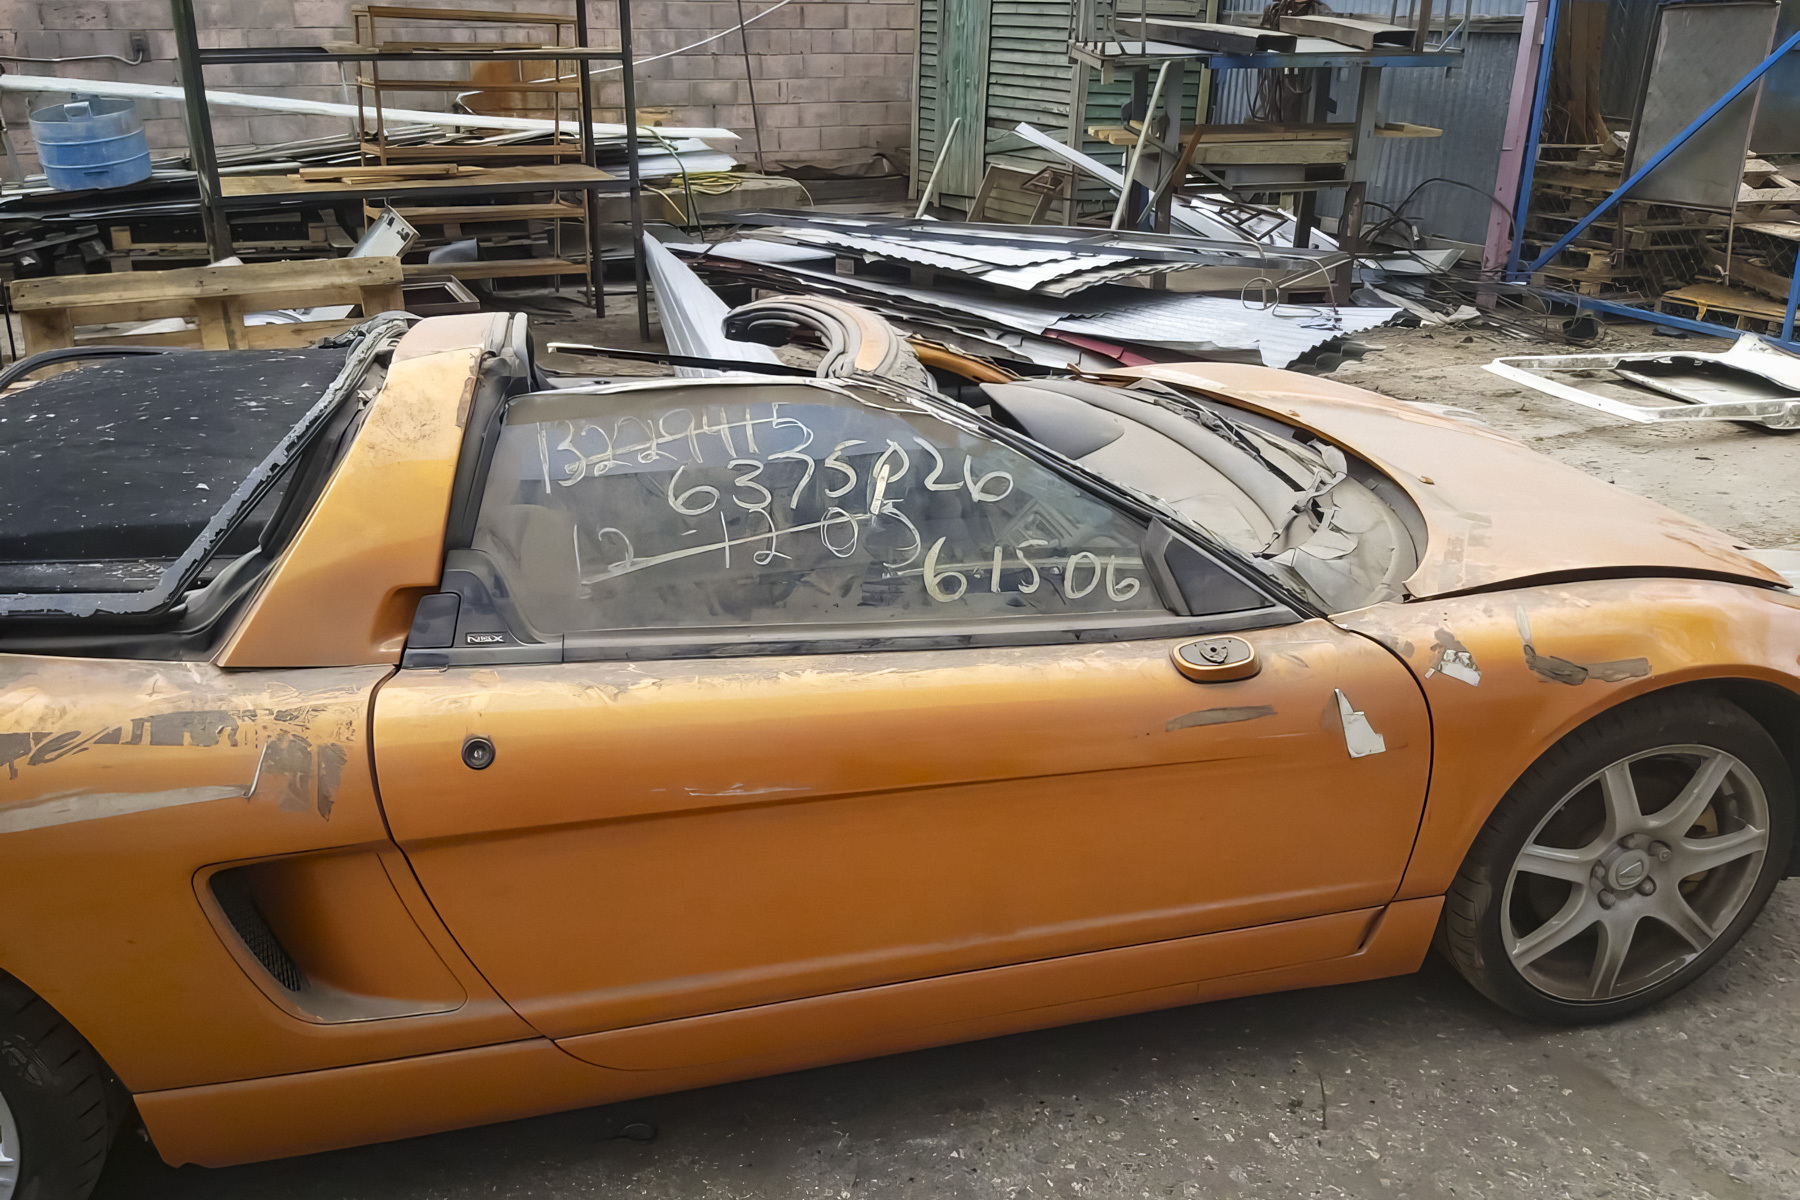 In Dzerzhinsky sell the remains of a 21-year-old Acura NSX for two million rubles